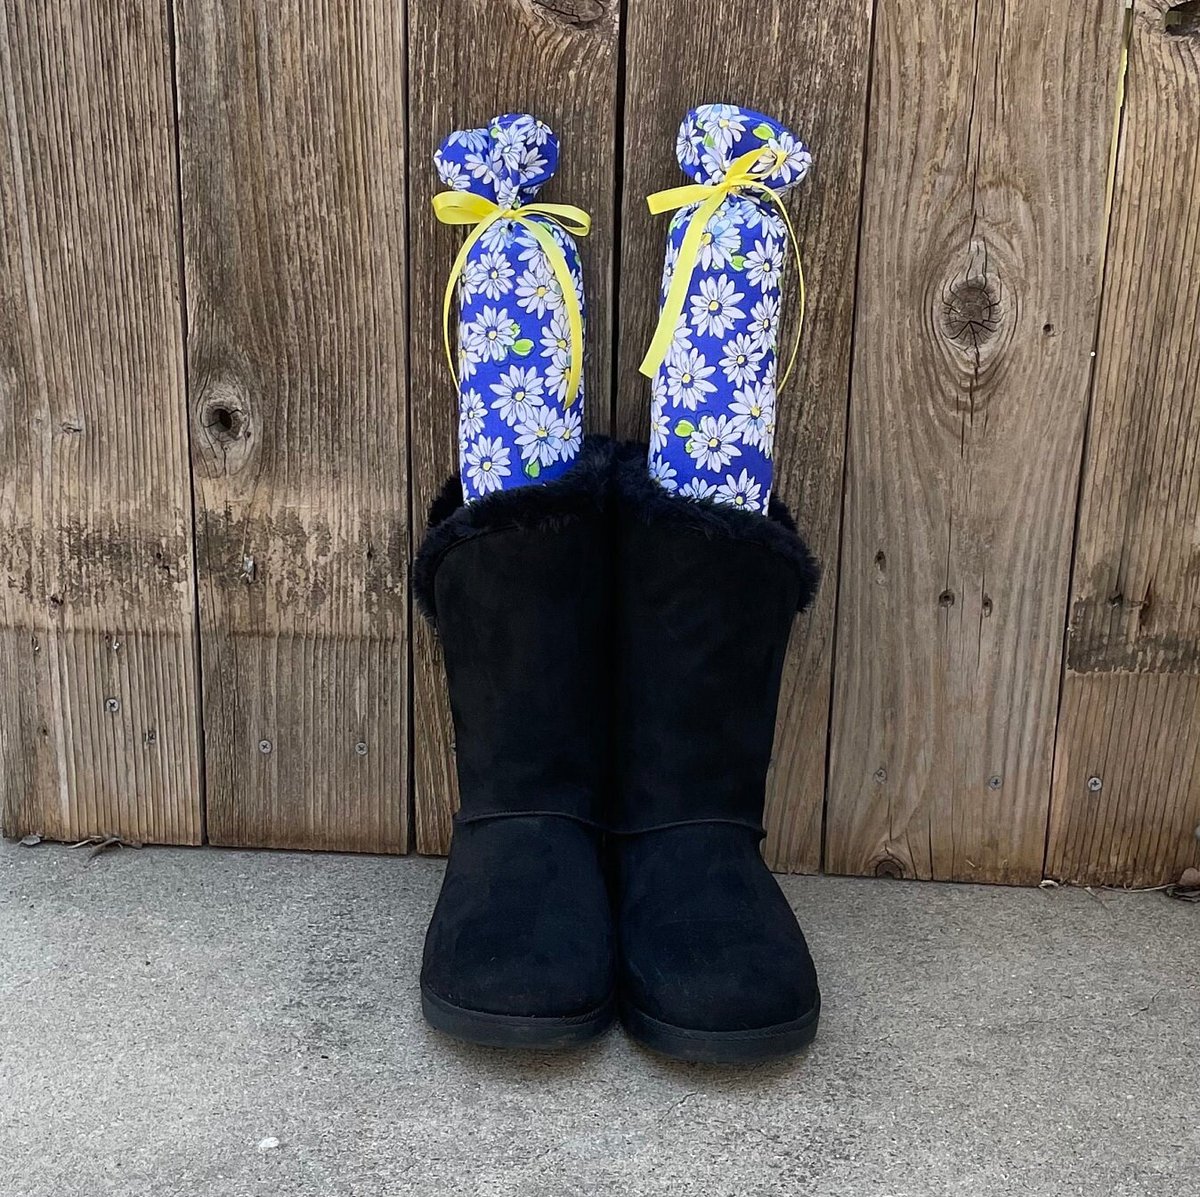 Now 20% off in my #etsy shop: Boot Shapers etsy.me/3PopxDz #boottrees #closetorganization #equestrian #handmade #customorder #bootorganization #bootaccessories #shoeaccessories #cottonfabric